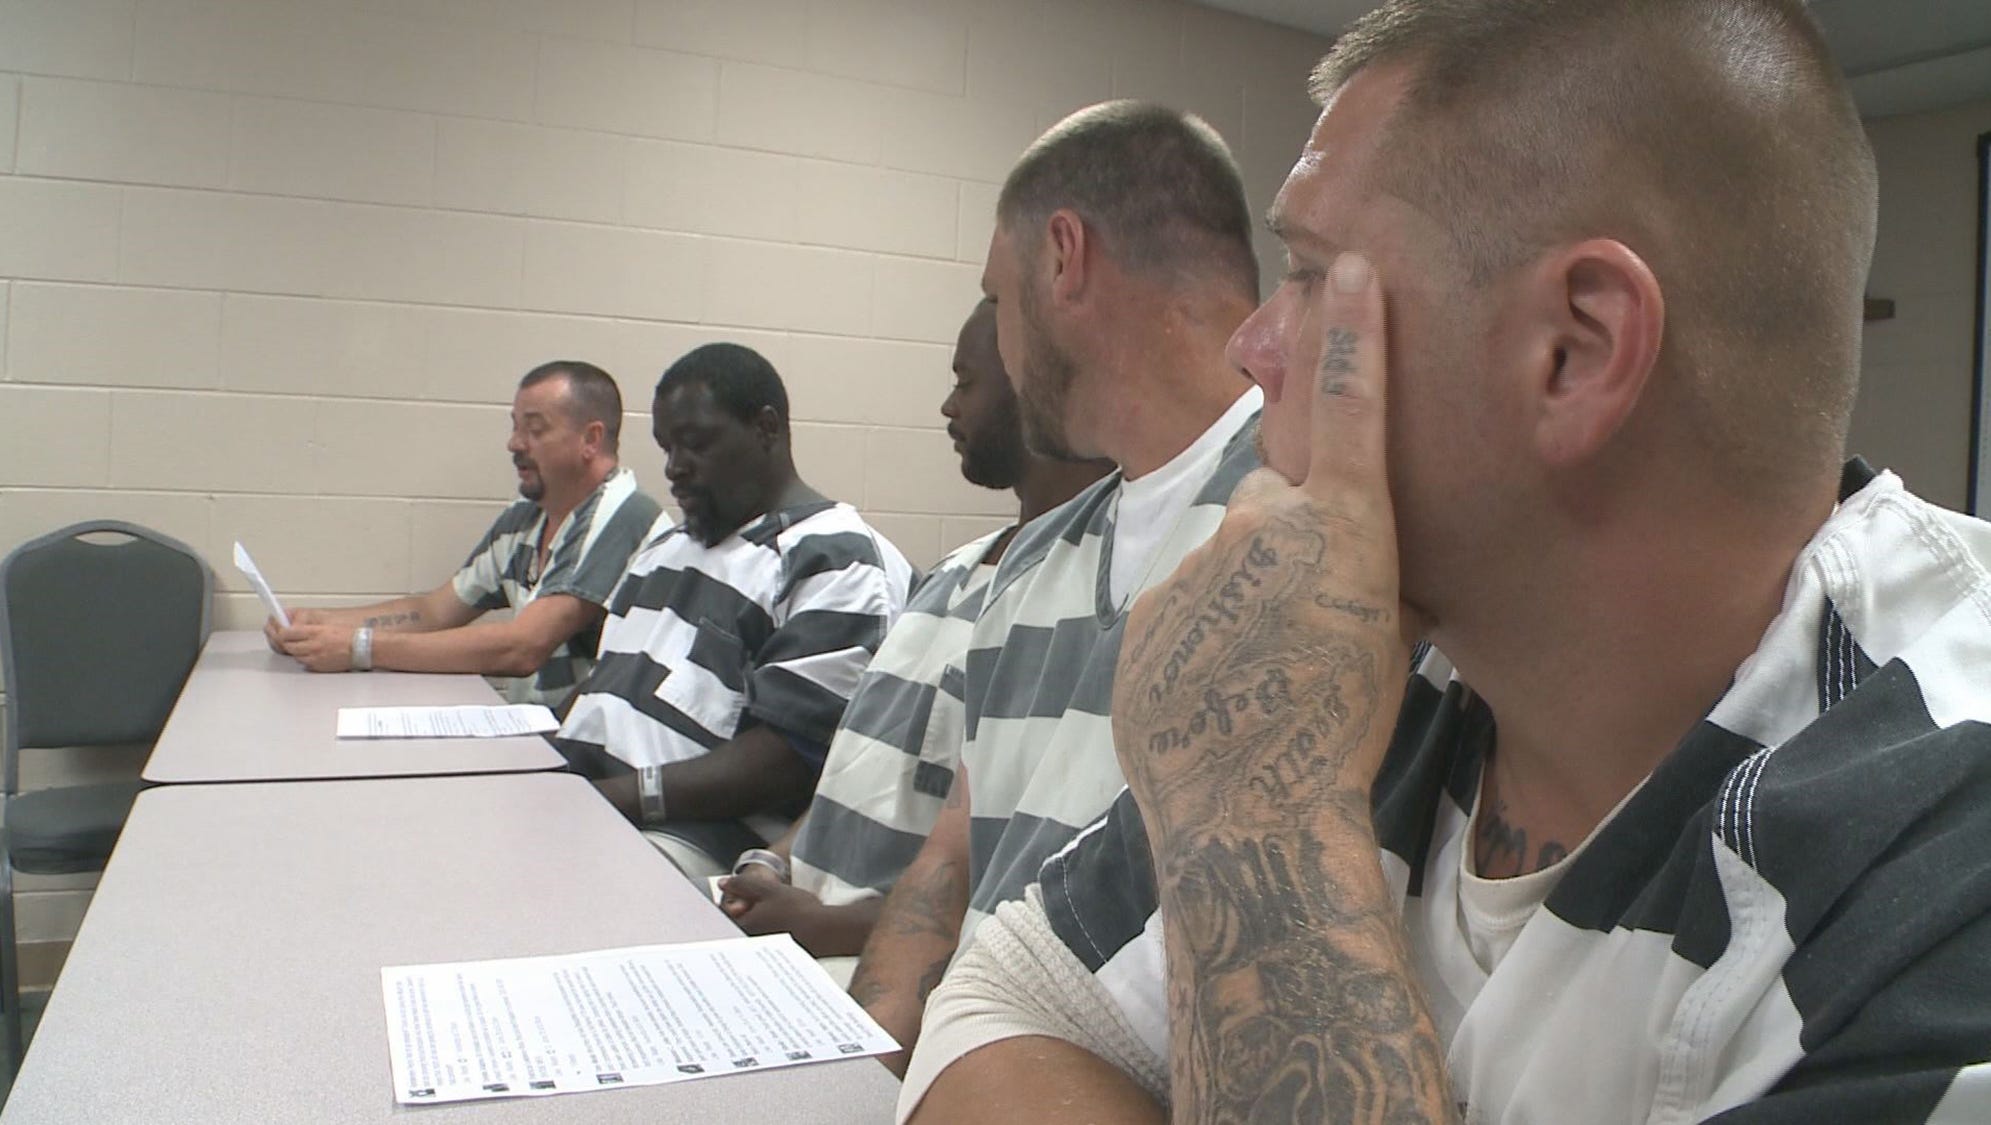 Inmates' kindness They saved deputy, but are surprised by attention